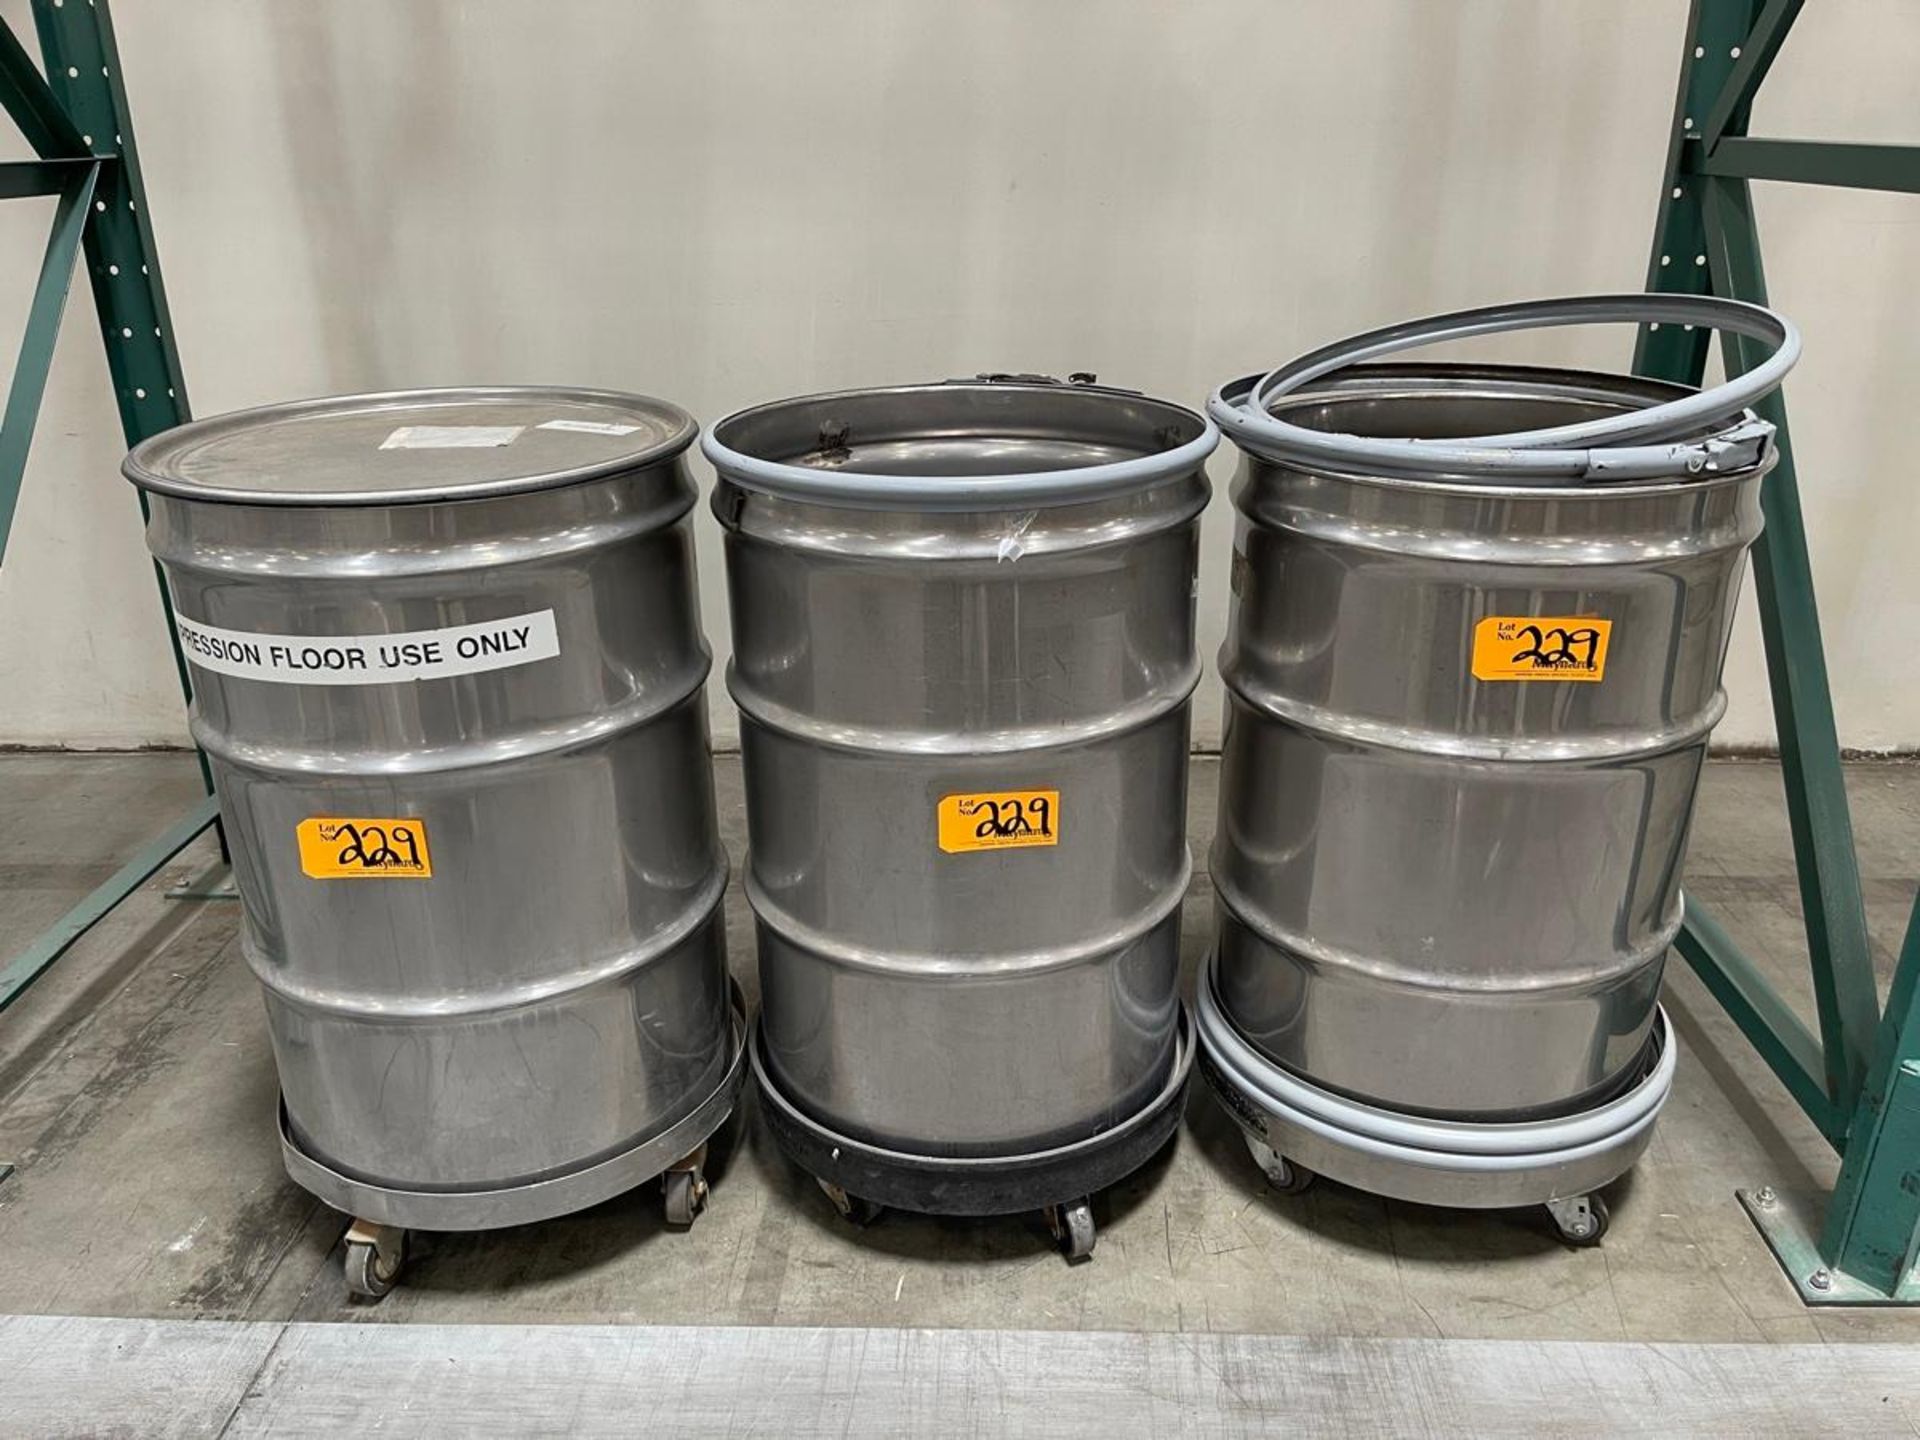 (2) Stainless Steel Drums on Steel Rolling Carts